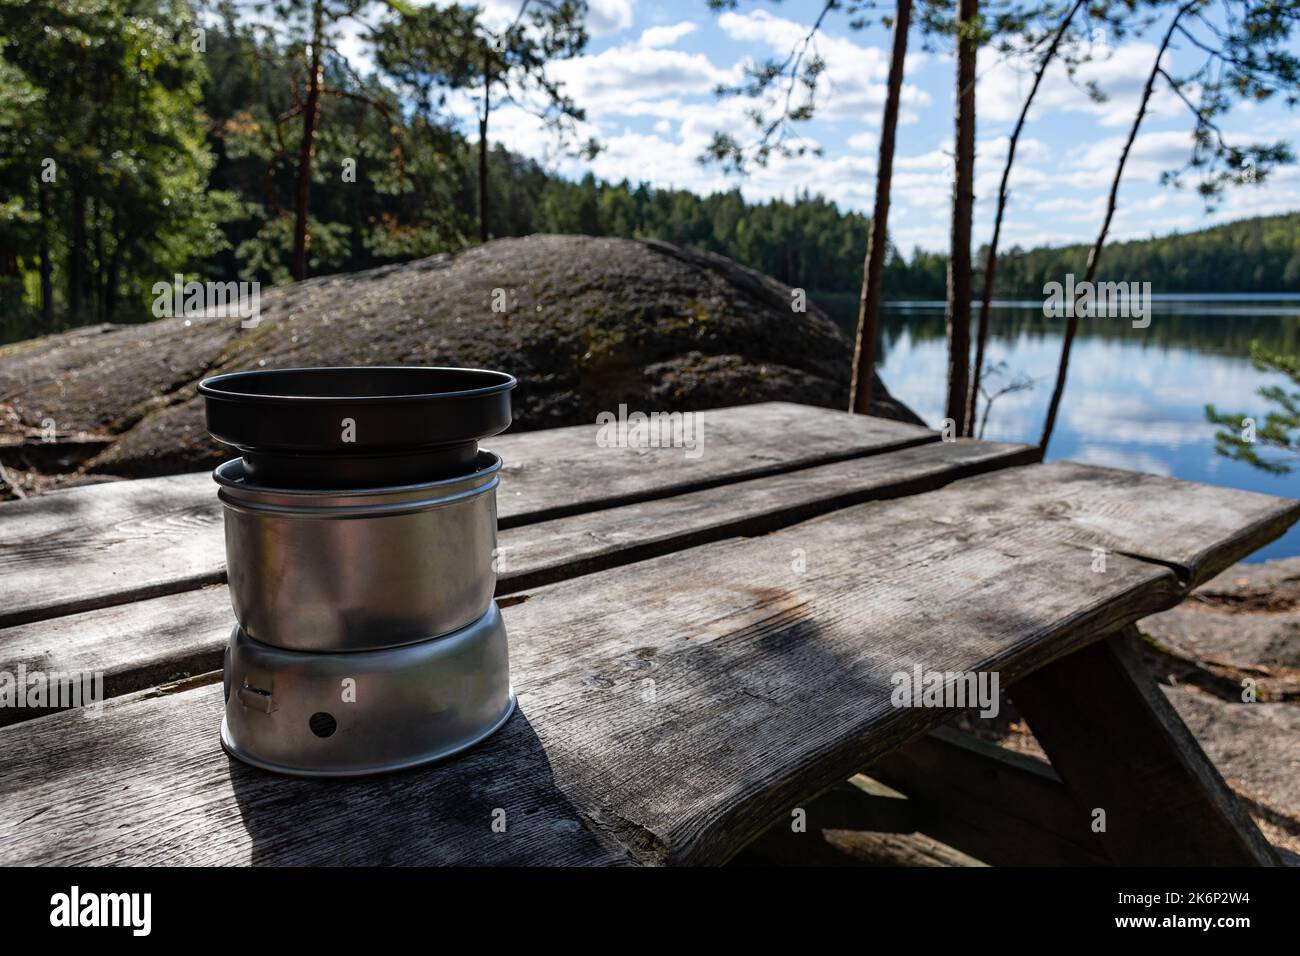 Alcohol-burning, portable stove with a lid on on the wooden table in nature with lake view in the background Stock Photo